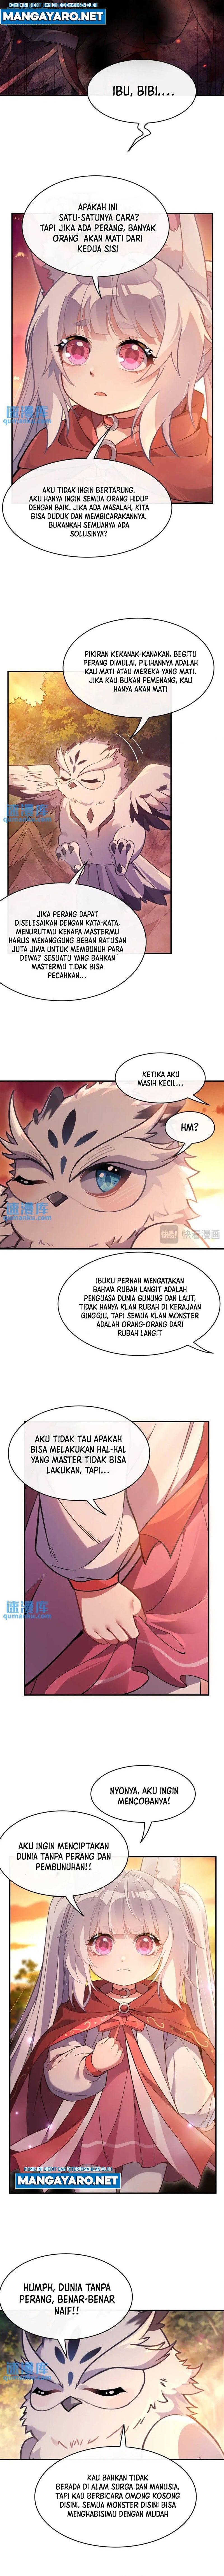 Dilarang COPAS - situs resmi www.mangacanblog.com - Komik my female apprentices are all big shots from the future 202 - chapter 202 203 Indonesia my female apprentices are all big shots from the future 202 - chapter 202 Terbaru 3|Baca Manga Komik Indonesia|Mangacan